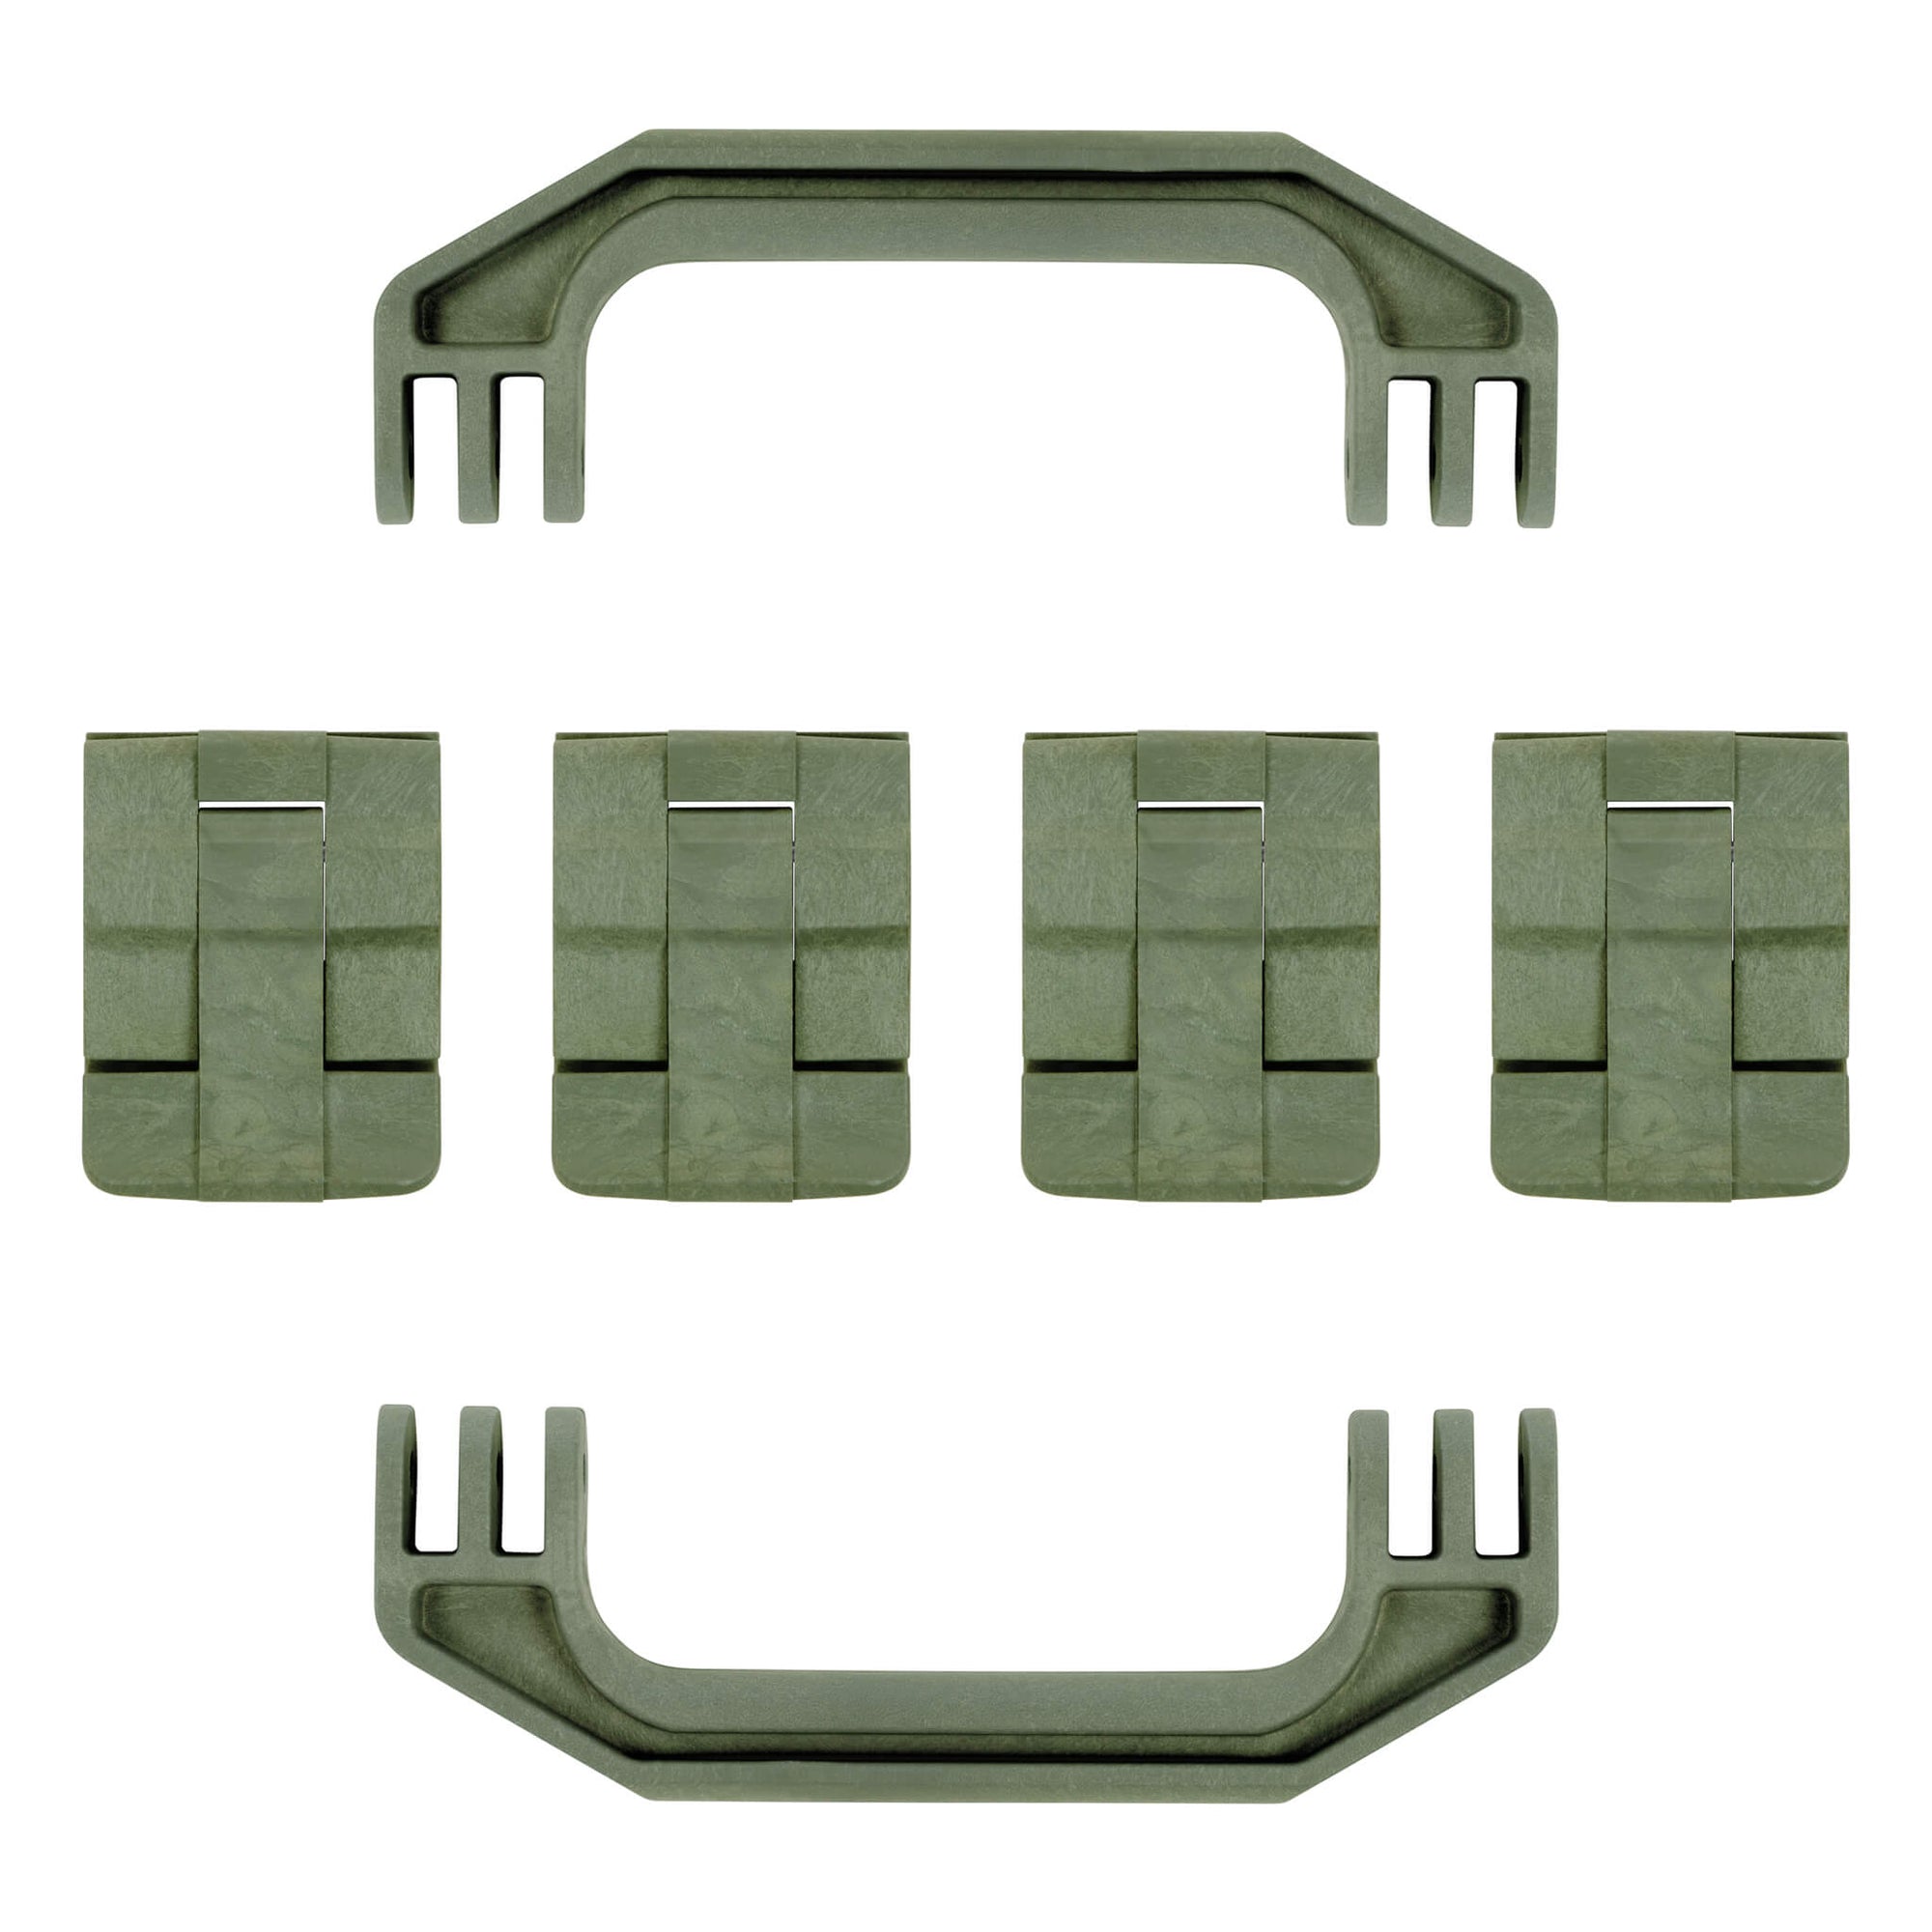 Pelican 1700 Gen1 Replacement Handles & Latches, OD Green (Set of 2 Handles, 4 Latches) ColorCase 